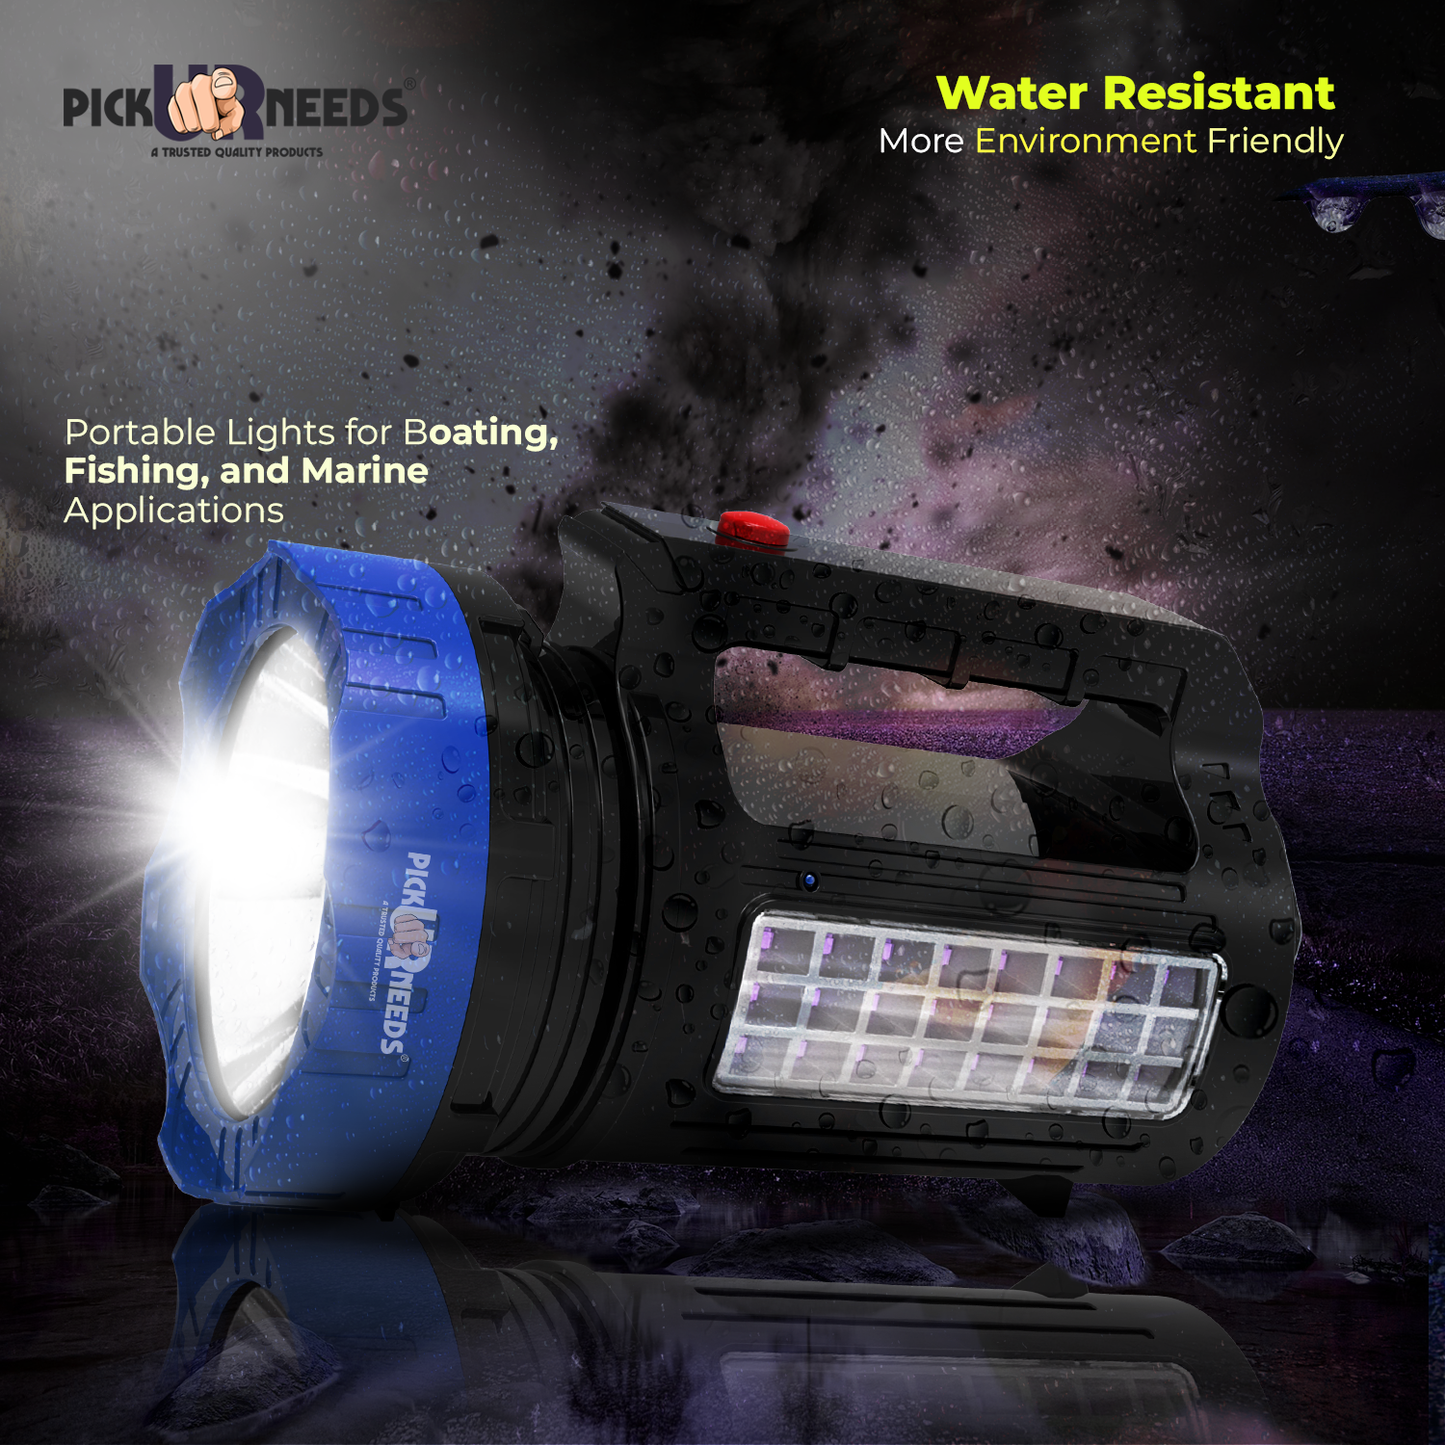 Pick Ur Needs 2 In 1 Rechargeable Emergency 150W+24 SMD Long Range LED Search Torch Light